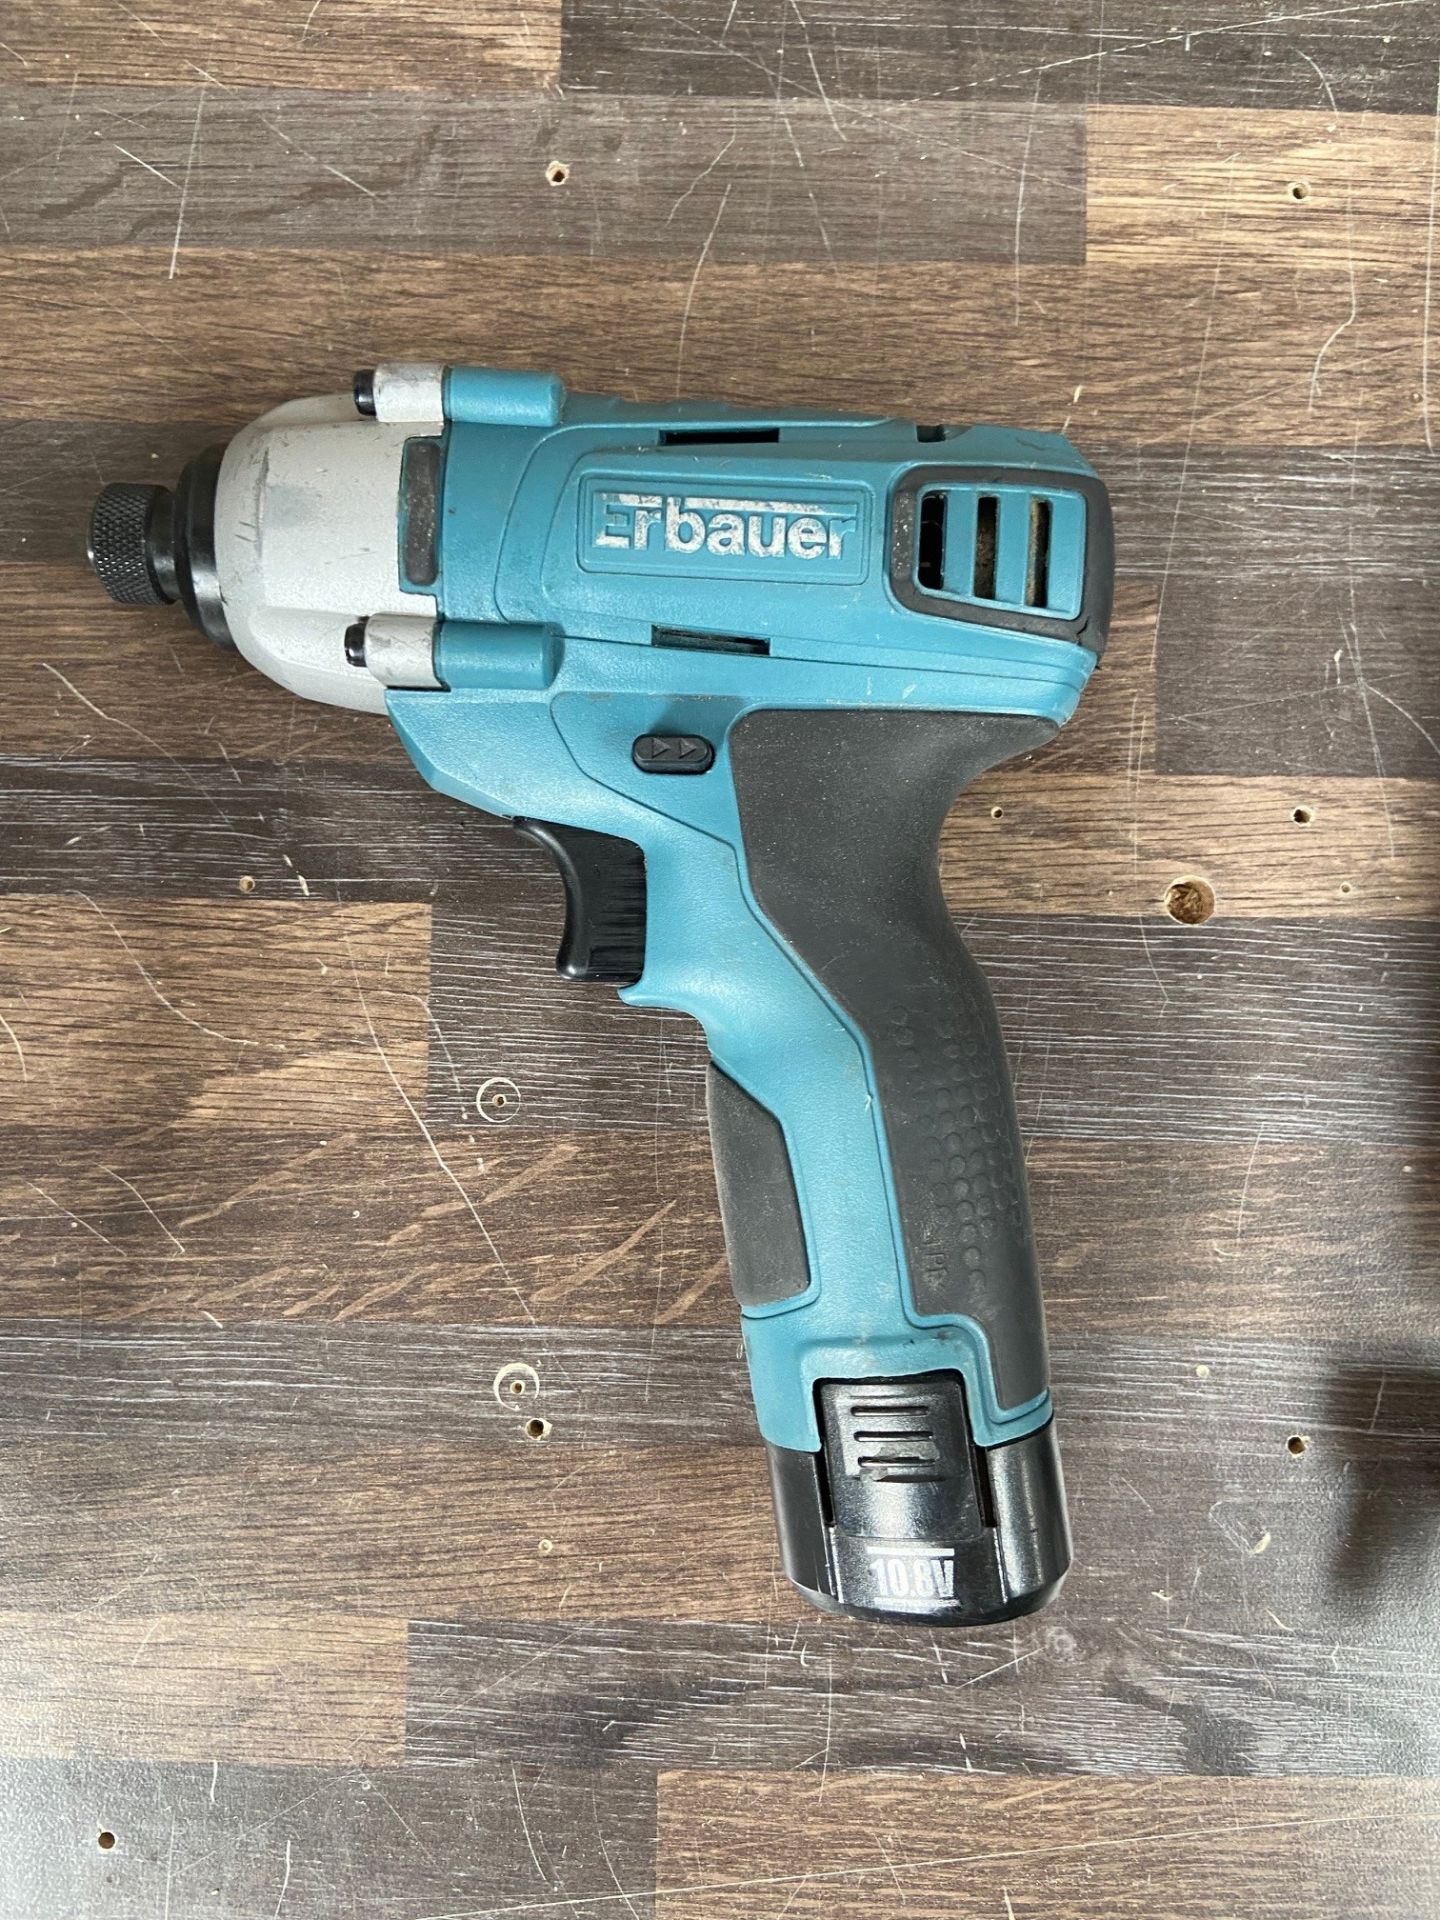 4 x Erbauer power tools, Erbauer drill driver, Erbauer EDD18-Li-2 Drill &2 x Erbauer Impact driver - Image 5 of 5